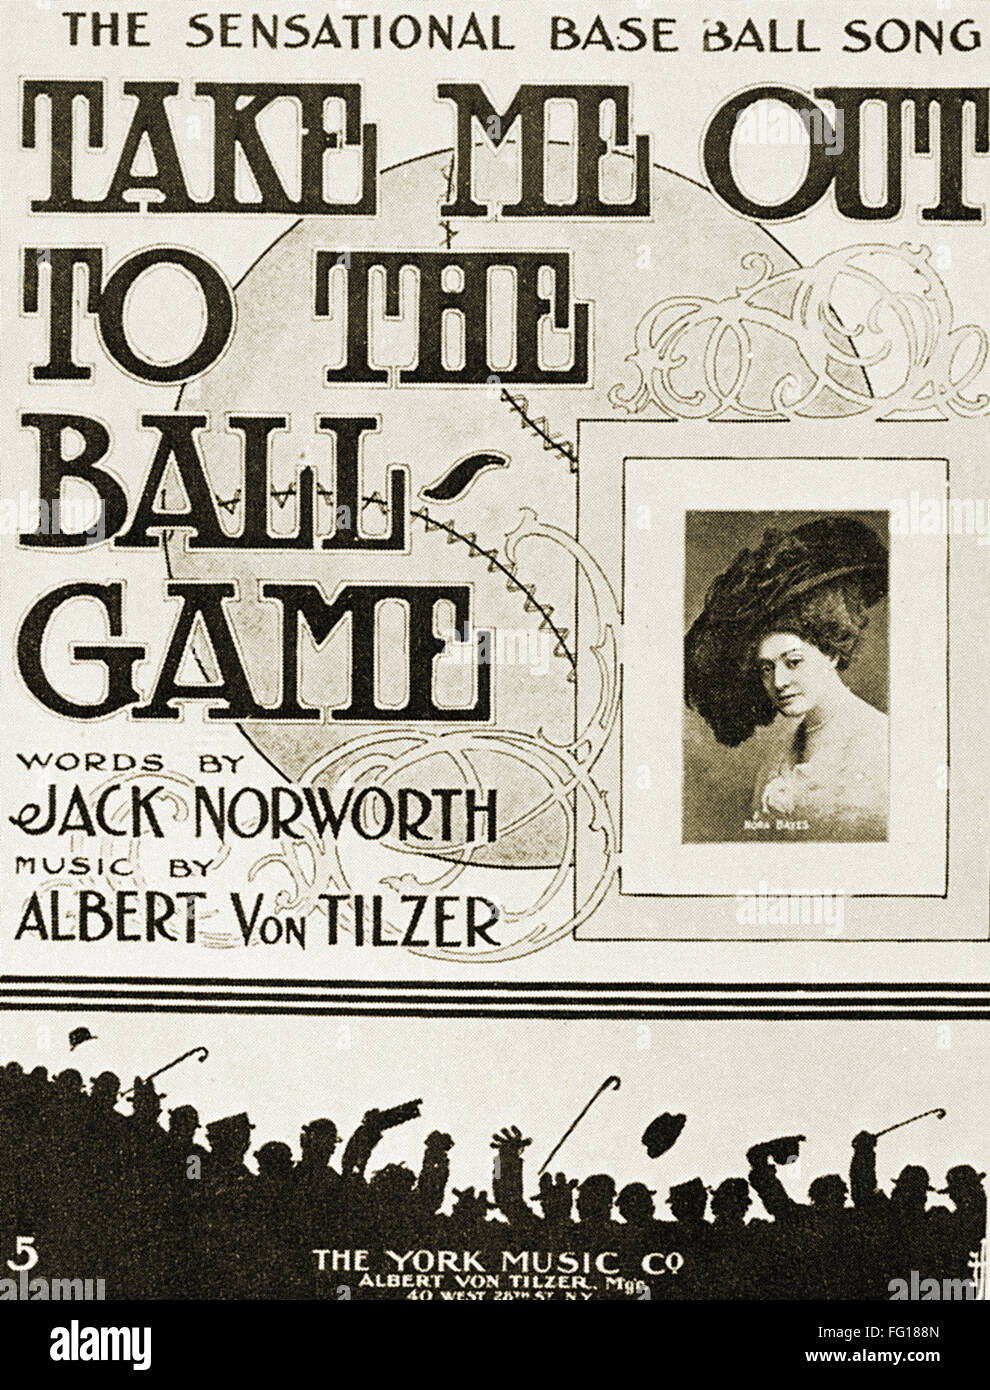 SHEET MUSIC: TAKE ME OUT. /nSheet music to cover to 'Take Me Out to the Ballgame,' 1908, by Jack Norworth and Albert von Tilzer. Stock Photo